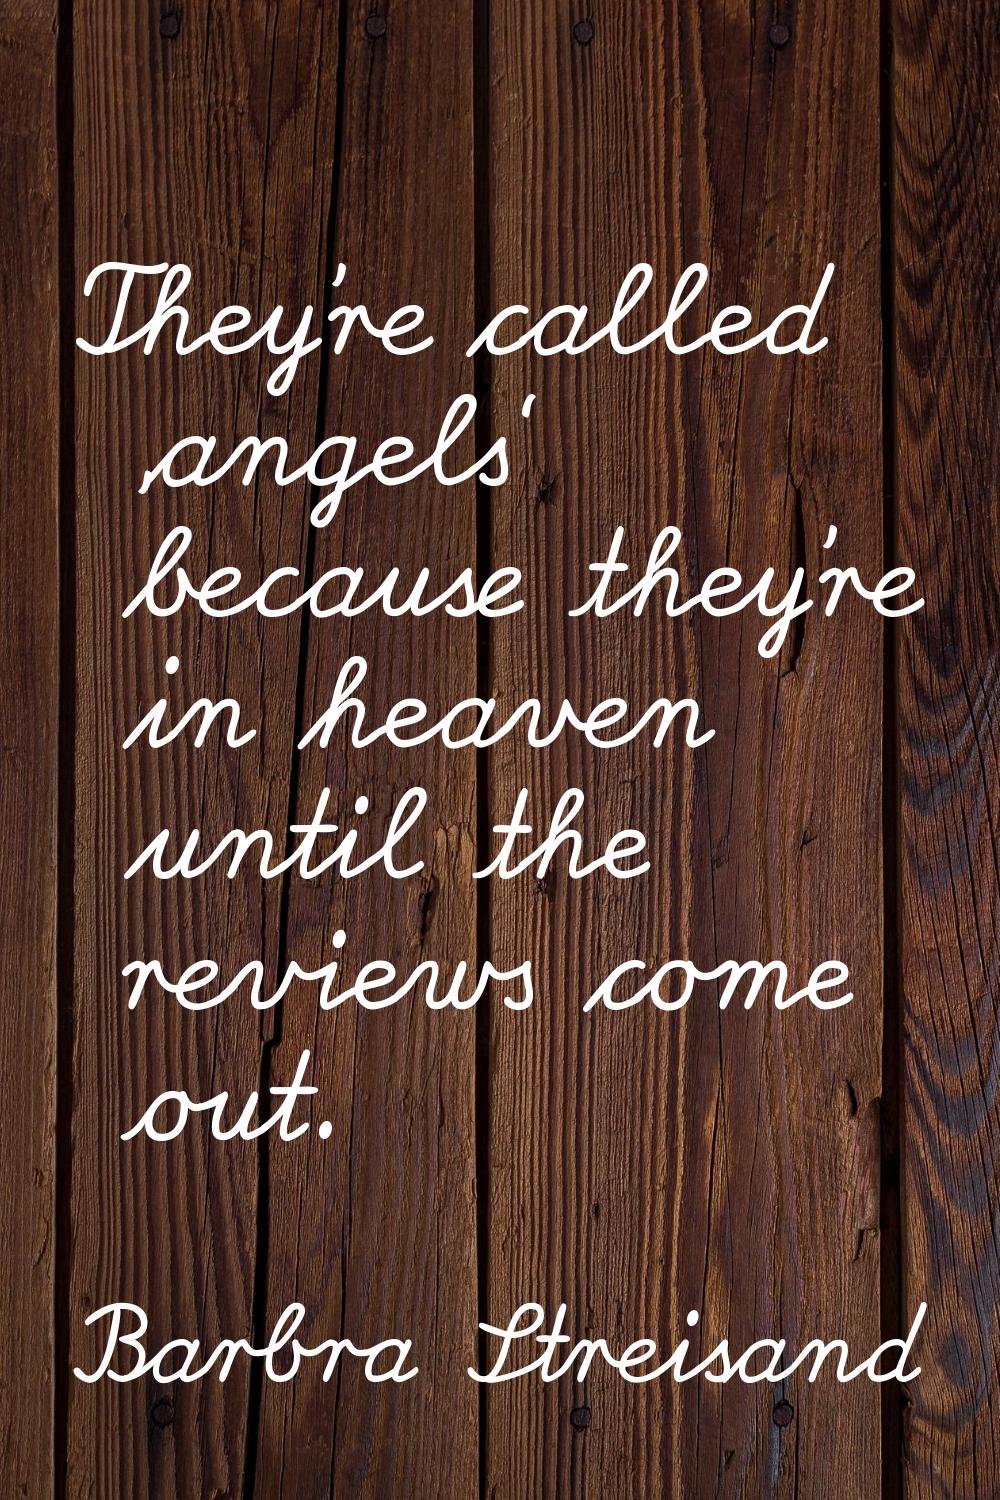 They're called 'angels' because they're in heaven until the reviews come out.